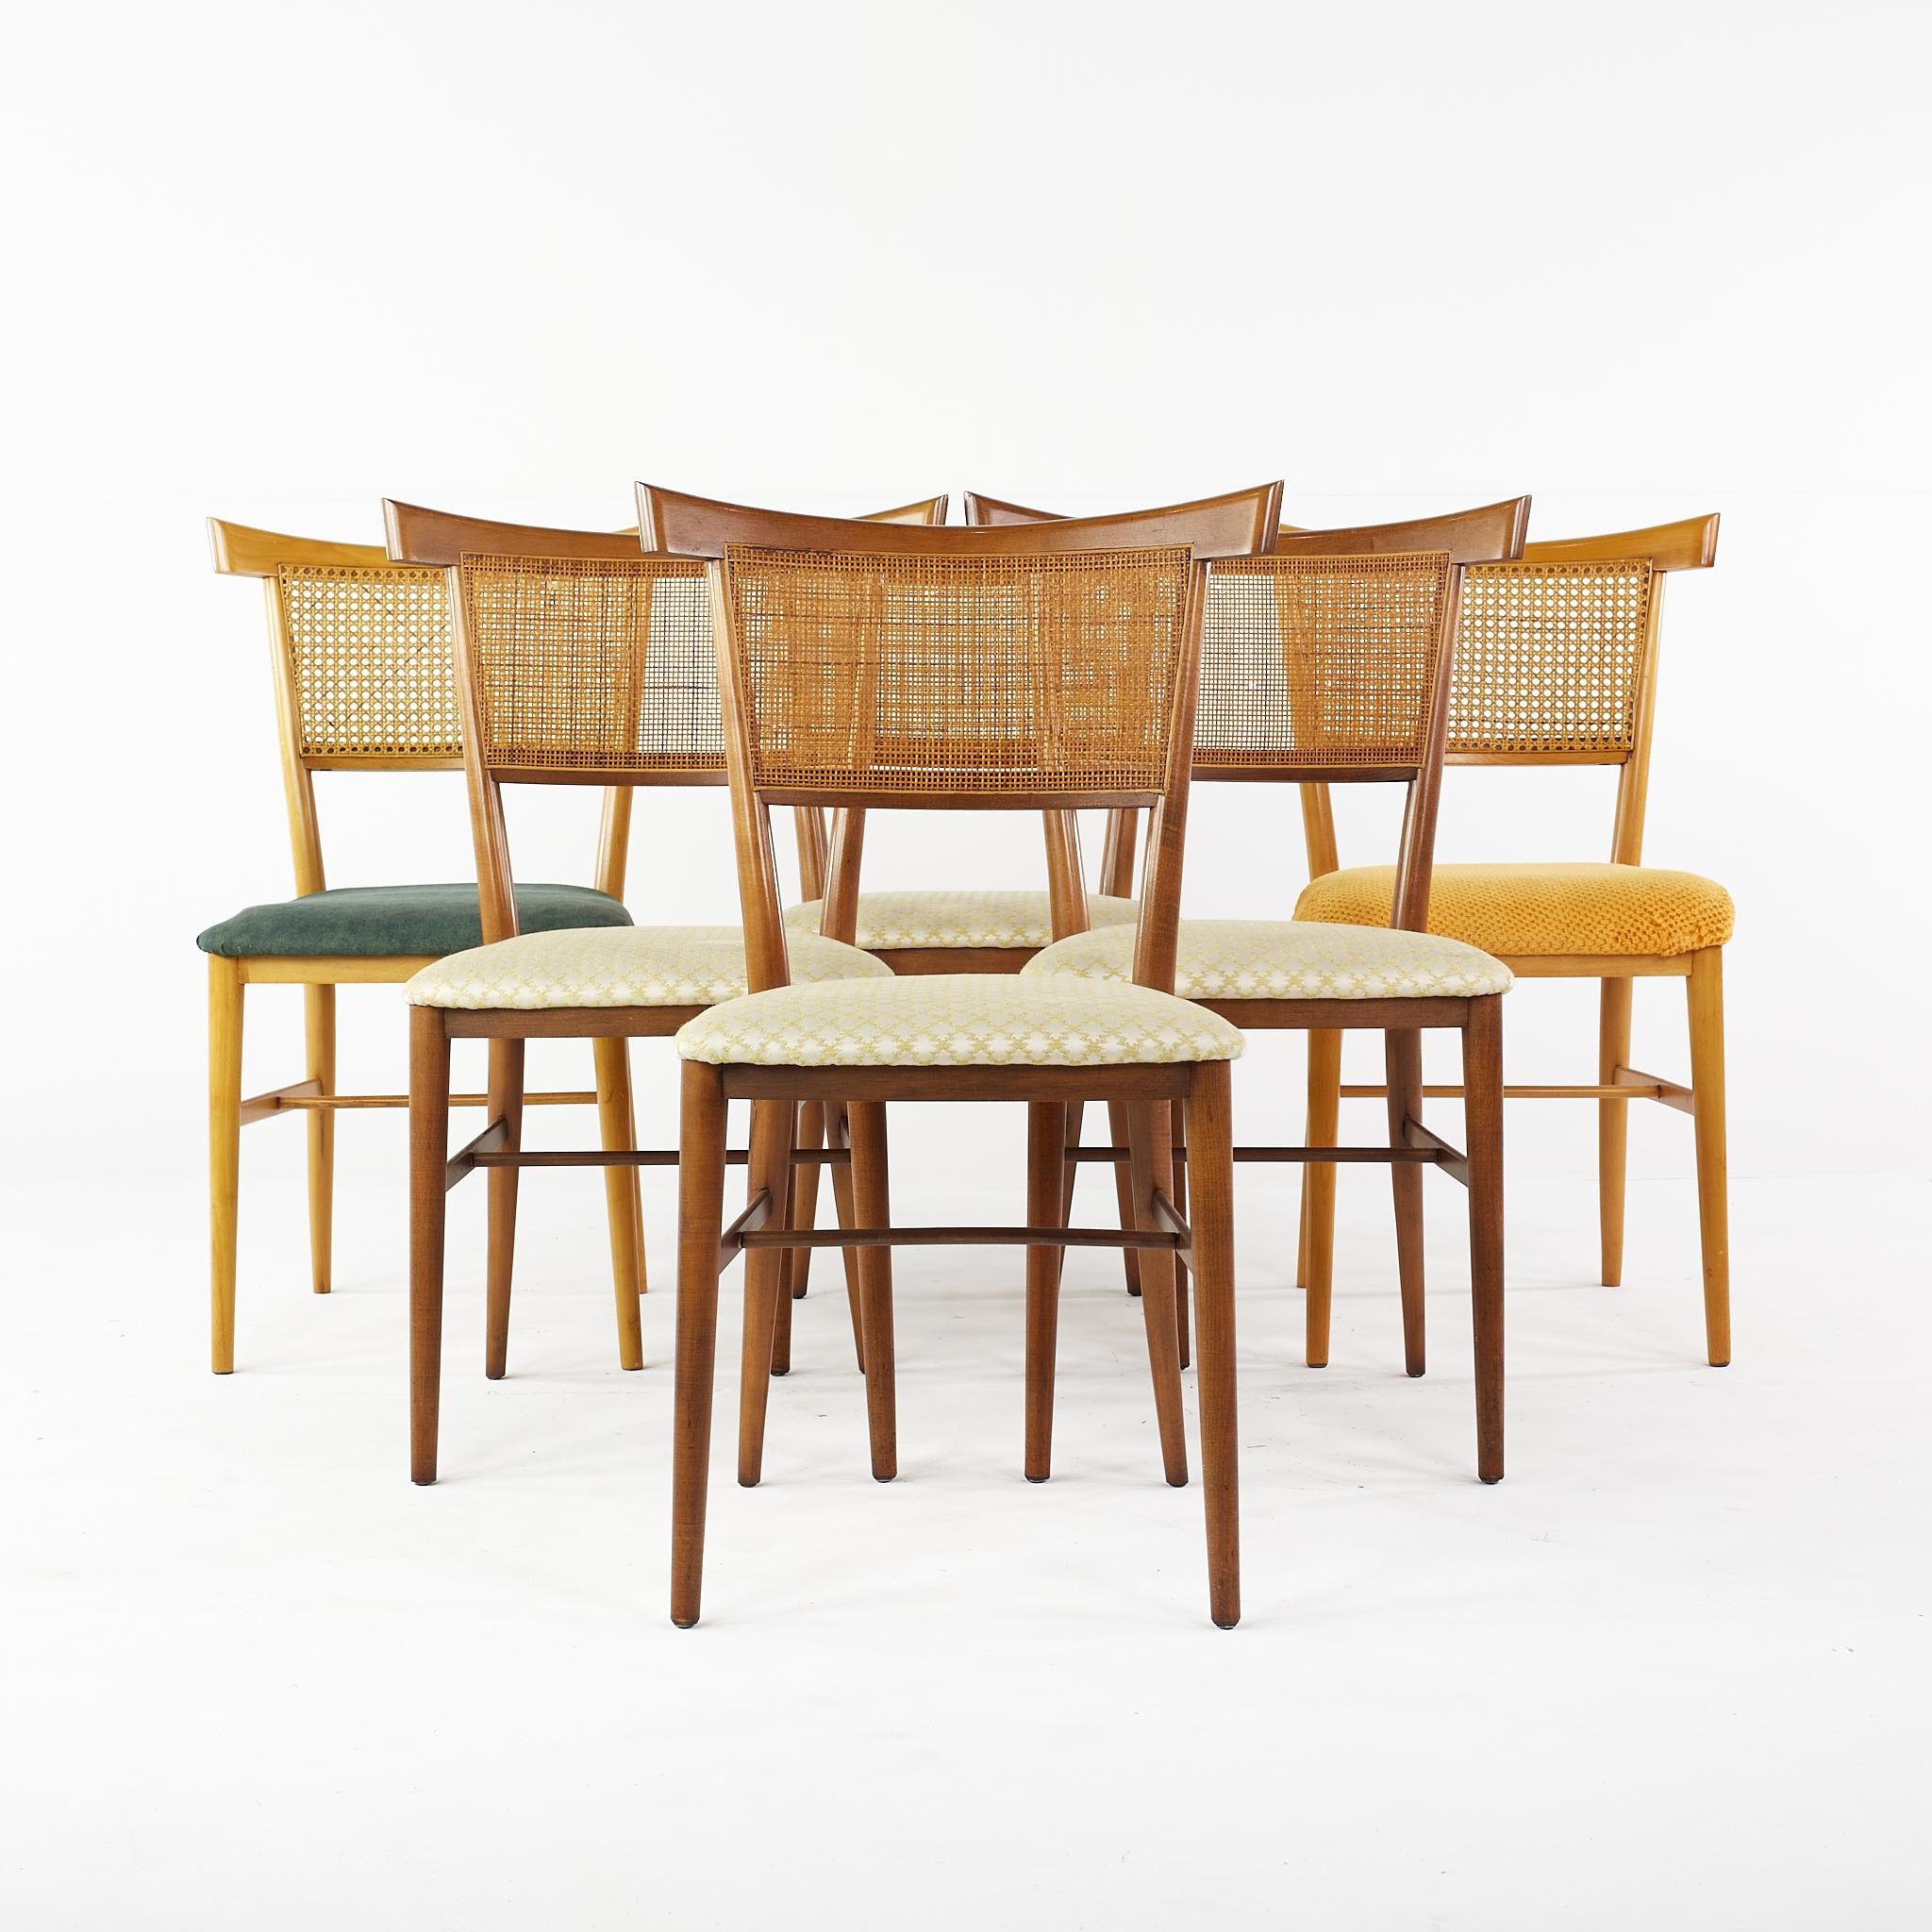 Paul McCobb for Planner Group Winchendon Maple and Cane dining chairs - Set of 6

Each chair measures: 18 wide x 19 deep x 35.25 high, with a seat height and chair clearance of 19 inches

Ready for new upholstery. This service is available for